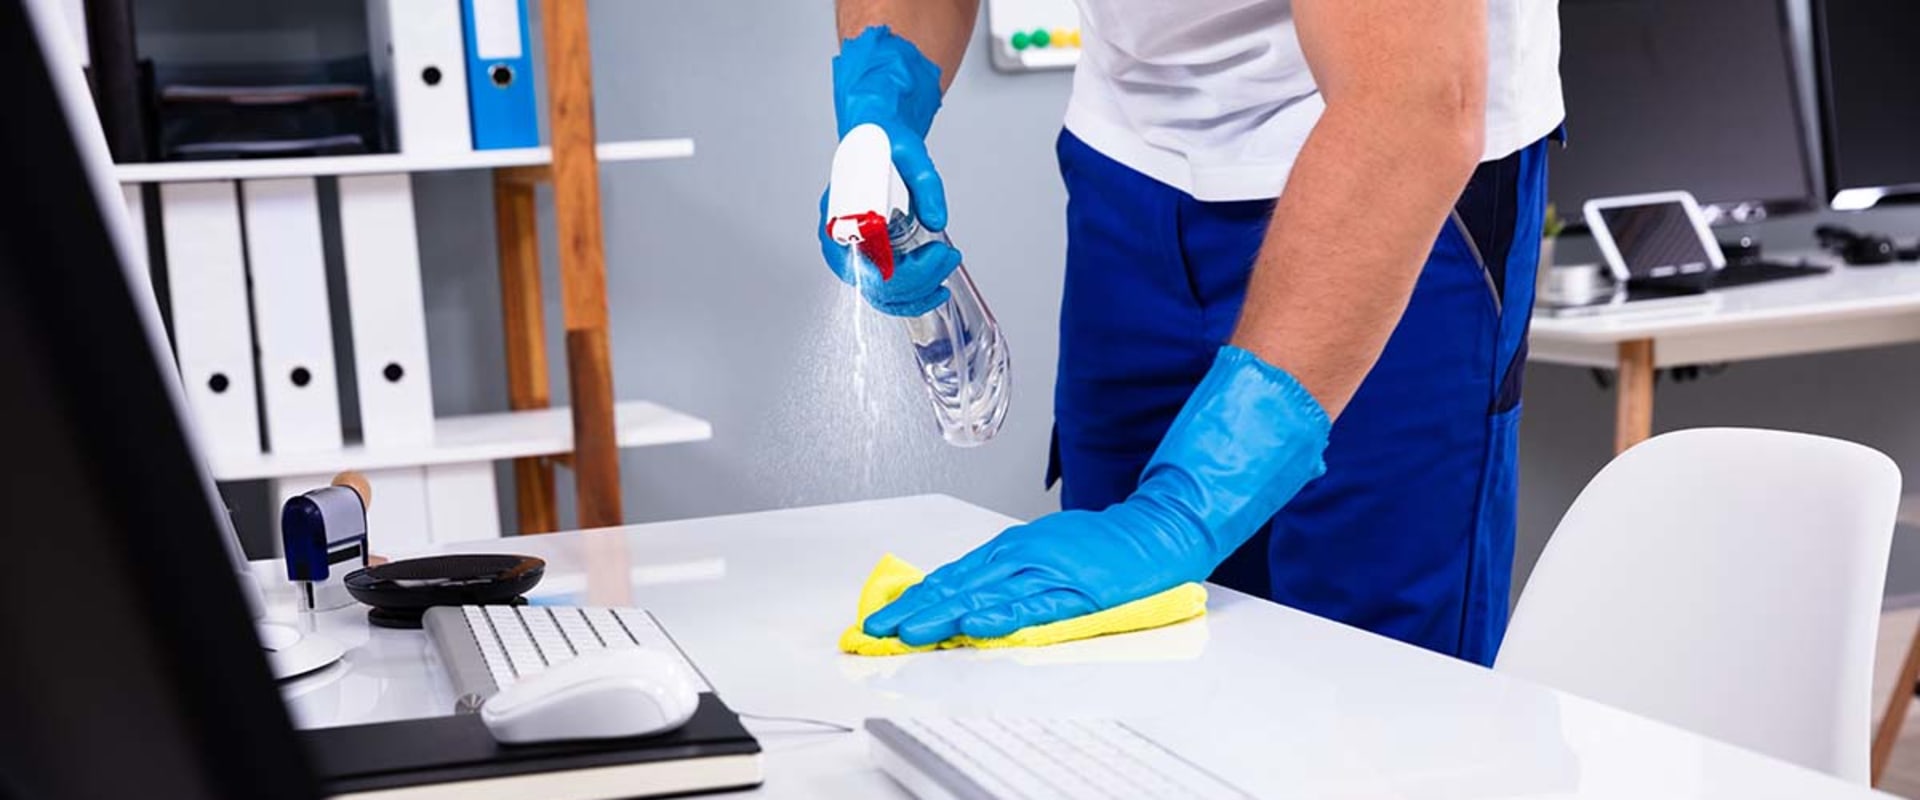 What type of industry is a cleaning business?